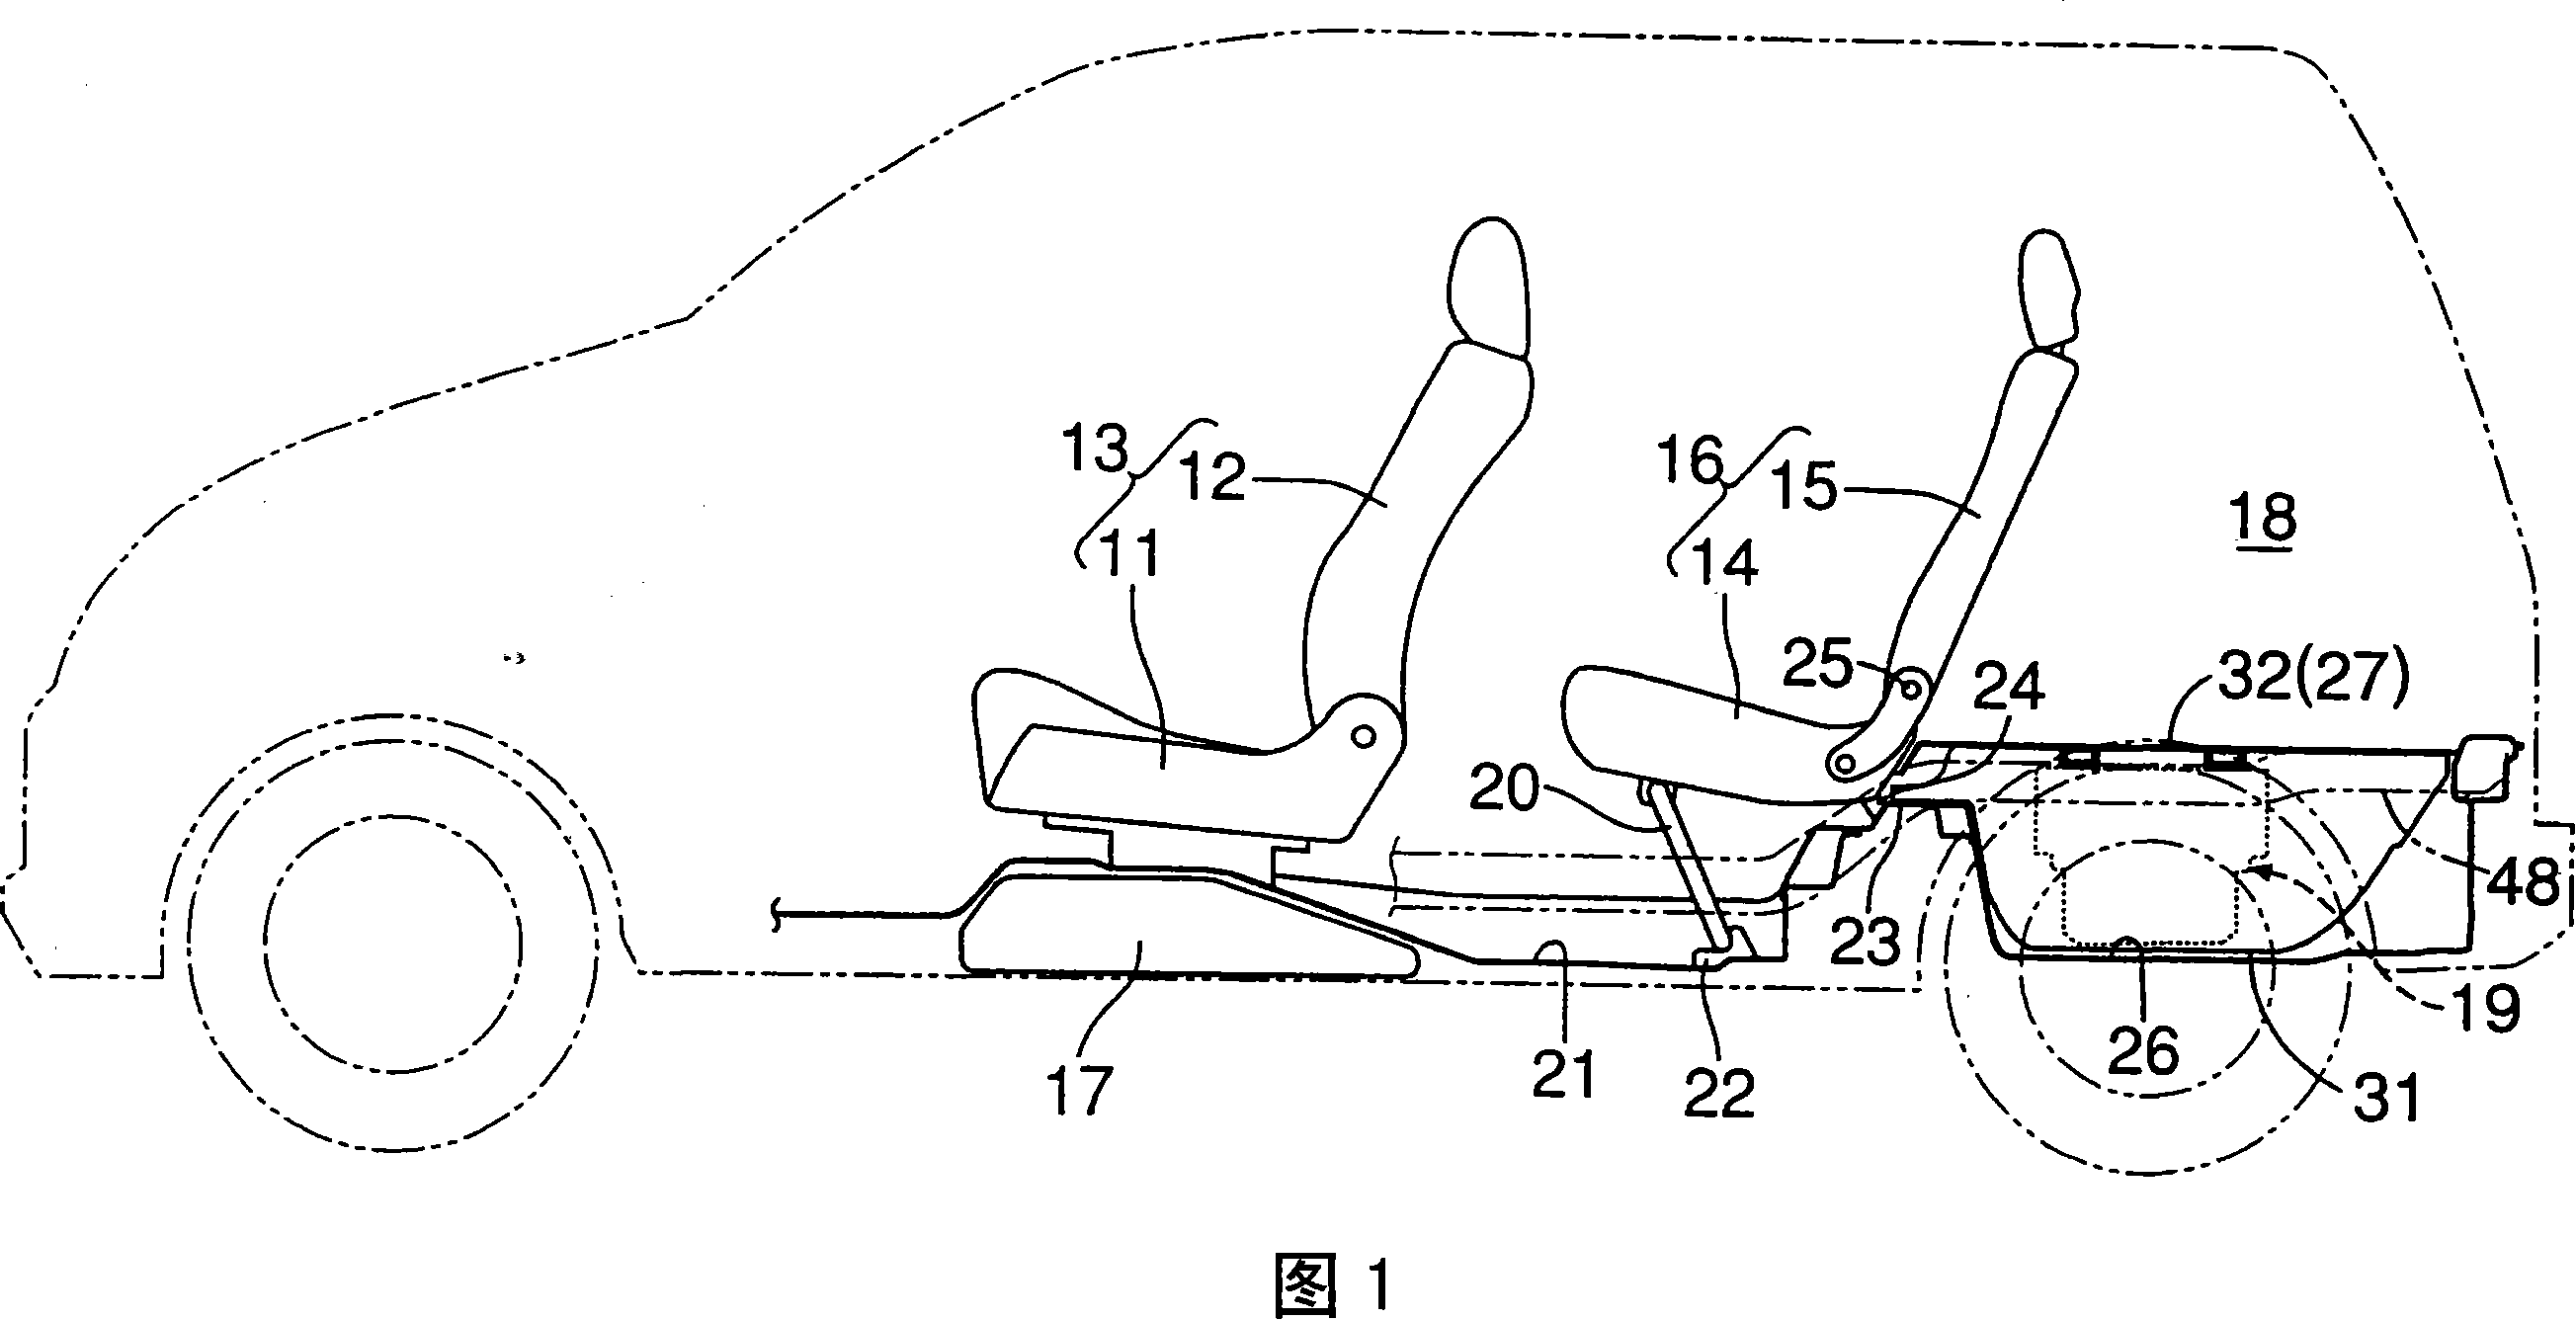 Electrical device cooling structure in vehicle